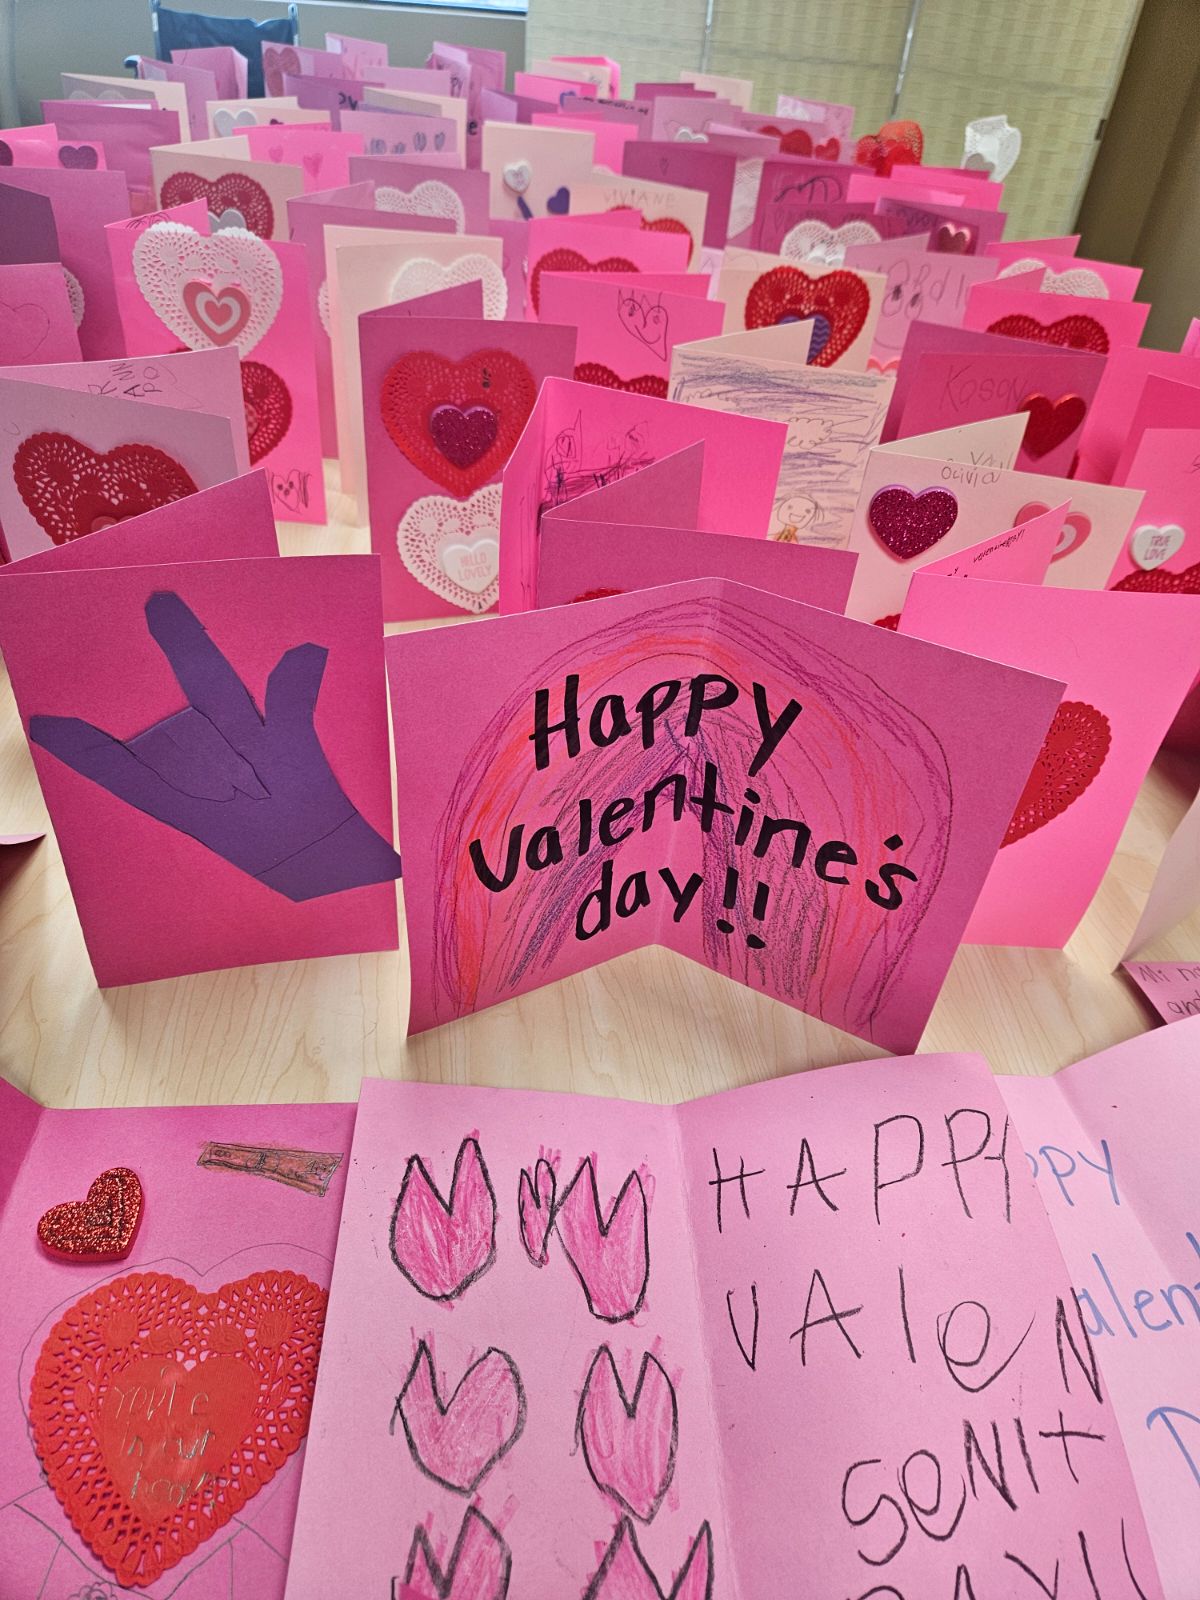 Thank you to our community for sending these beautiful valentines for our seniors throughout St. Charles